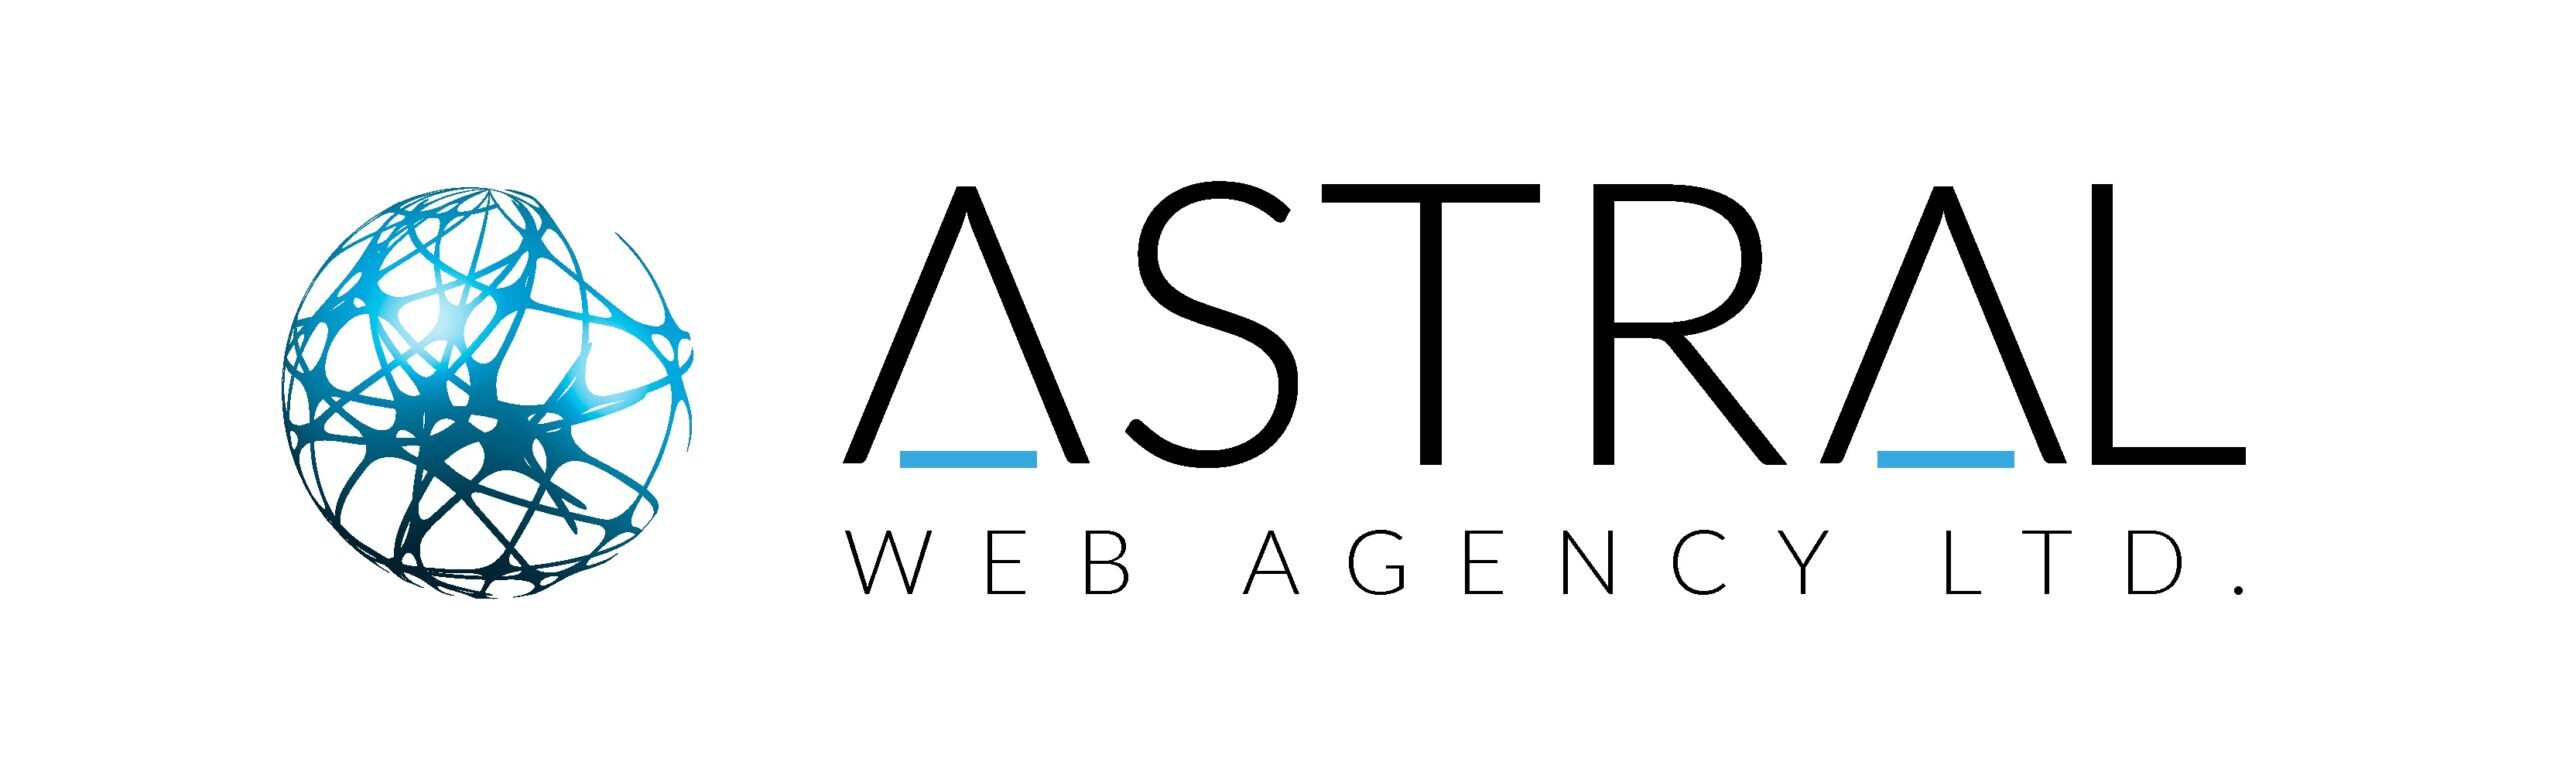 Astral Web Agency